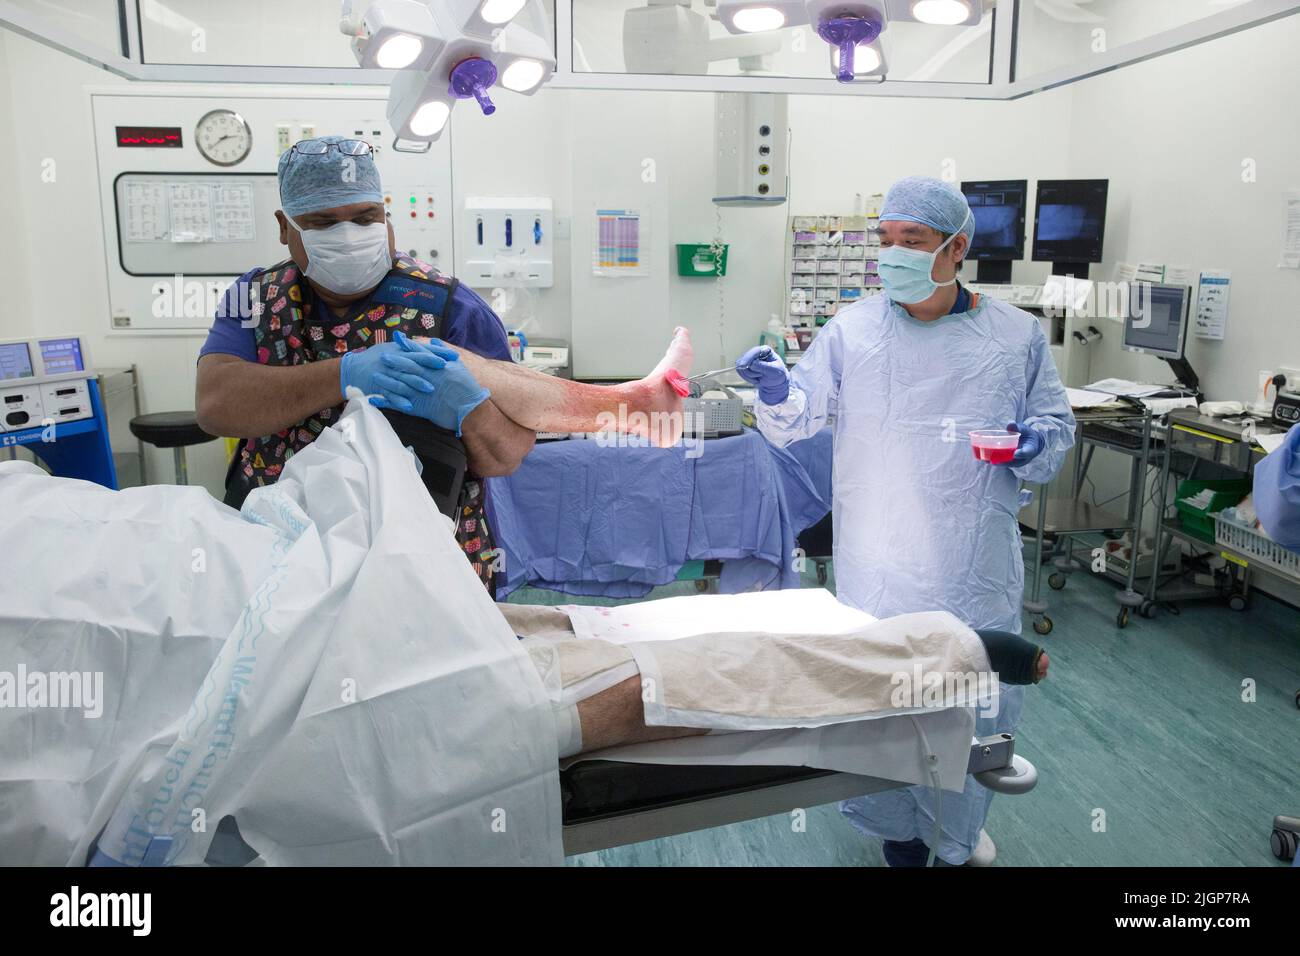 Hospital staff prepare a patient for foot surgery. The NHS is under pressure following severe cuts and staff shortages. Stock Photo